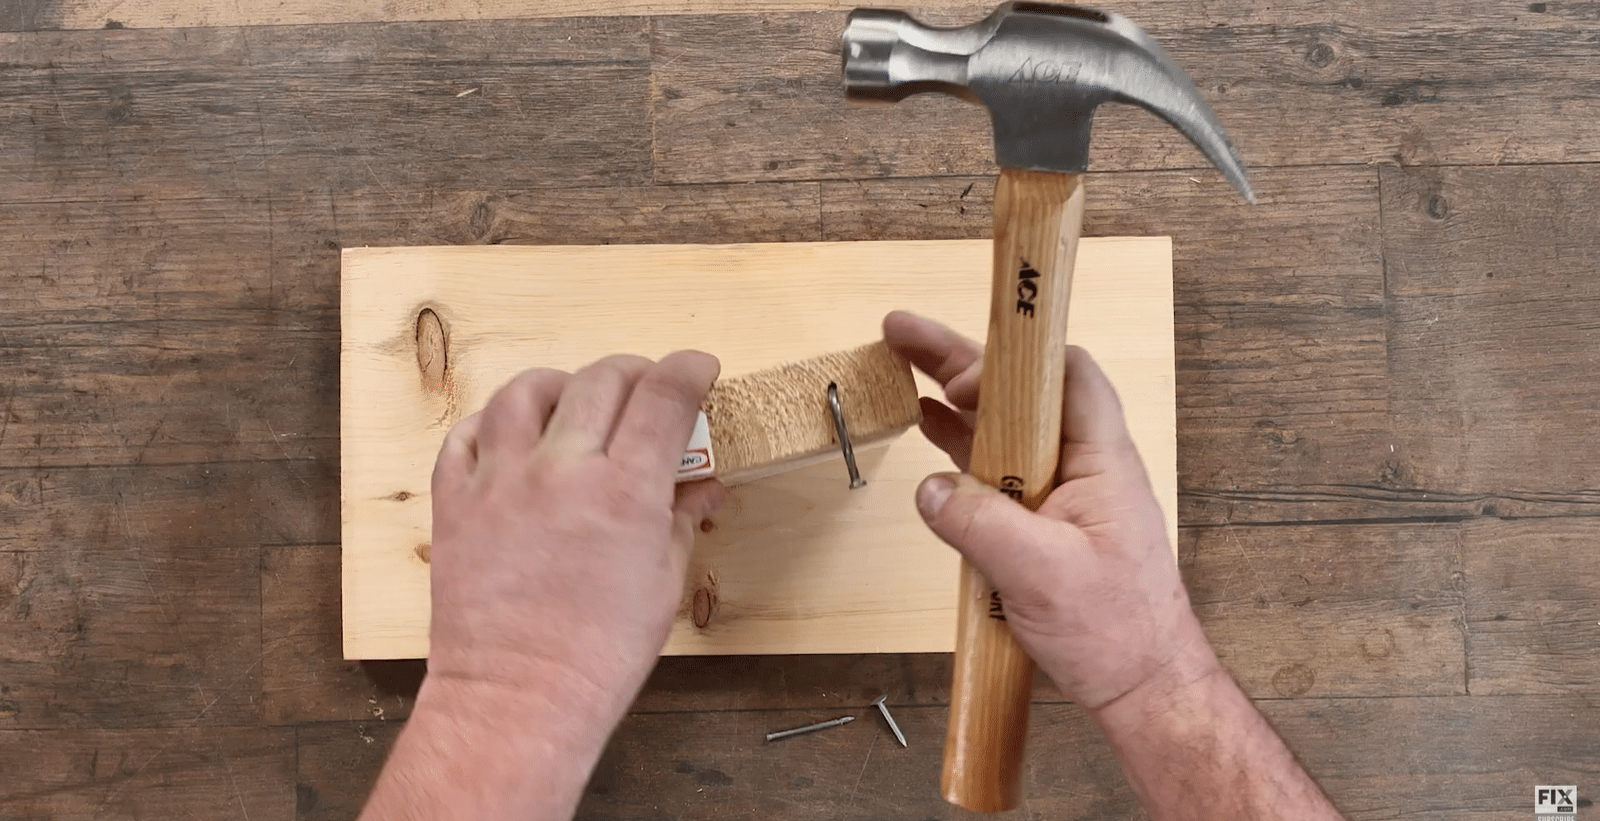 Bending a Nail using a Hammer into a Wooden Block